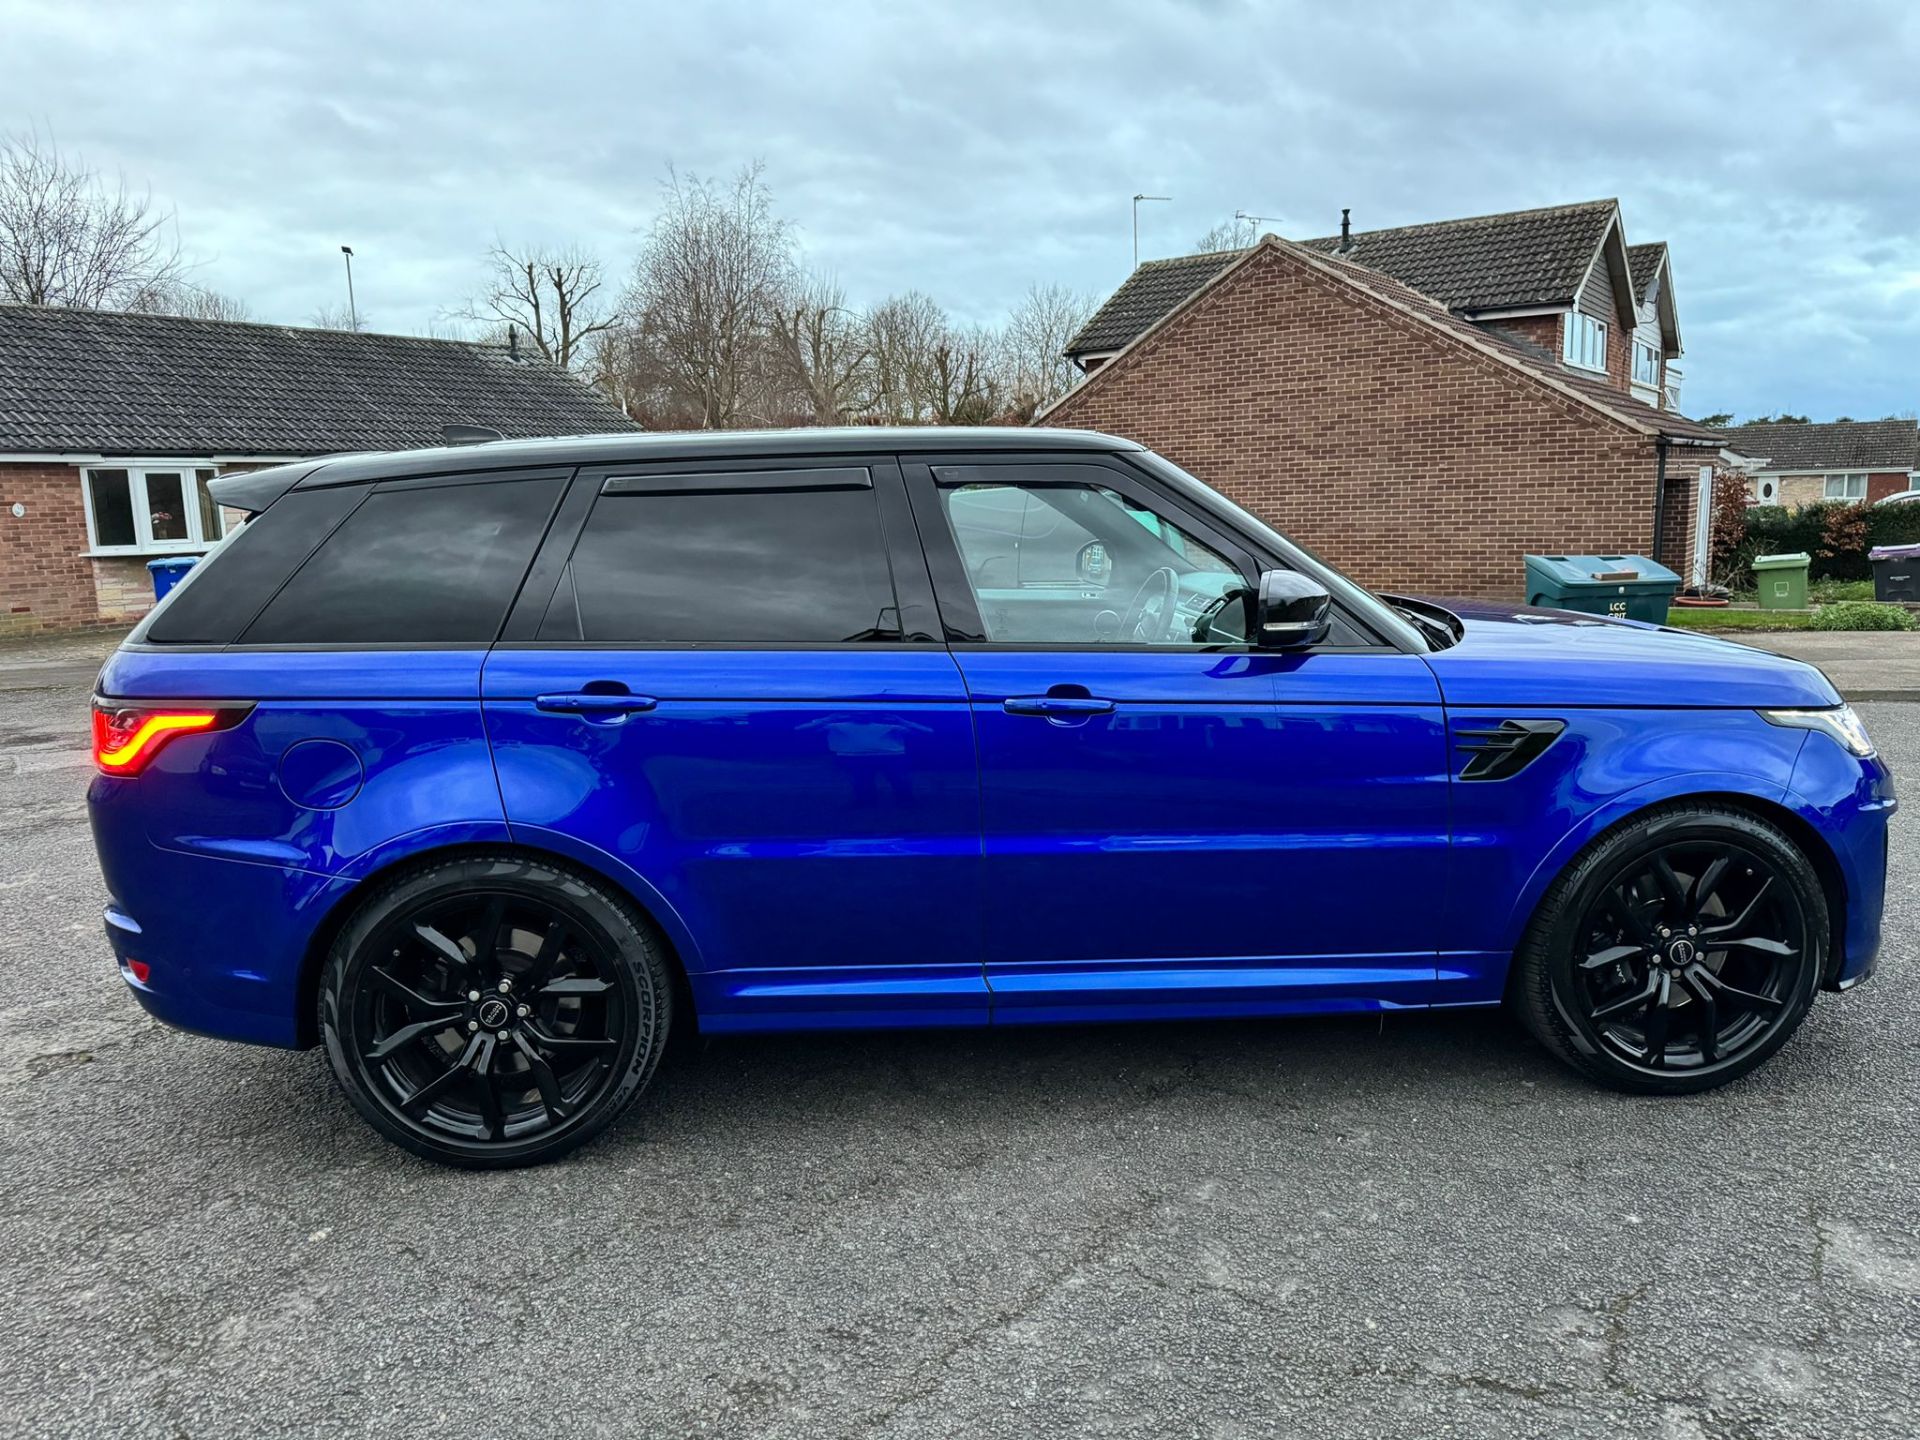 2018 18 RANGE ROVER SVR - 62K MILES WITH FULL LAND ROVER HISTORY - EXTREMELY CLEAN EXAMPLE. - Image 9 of 10